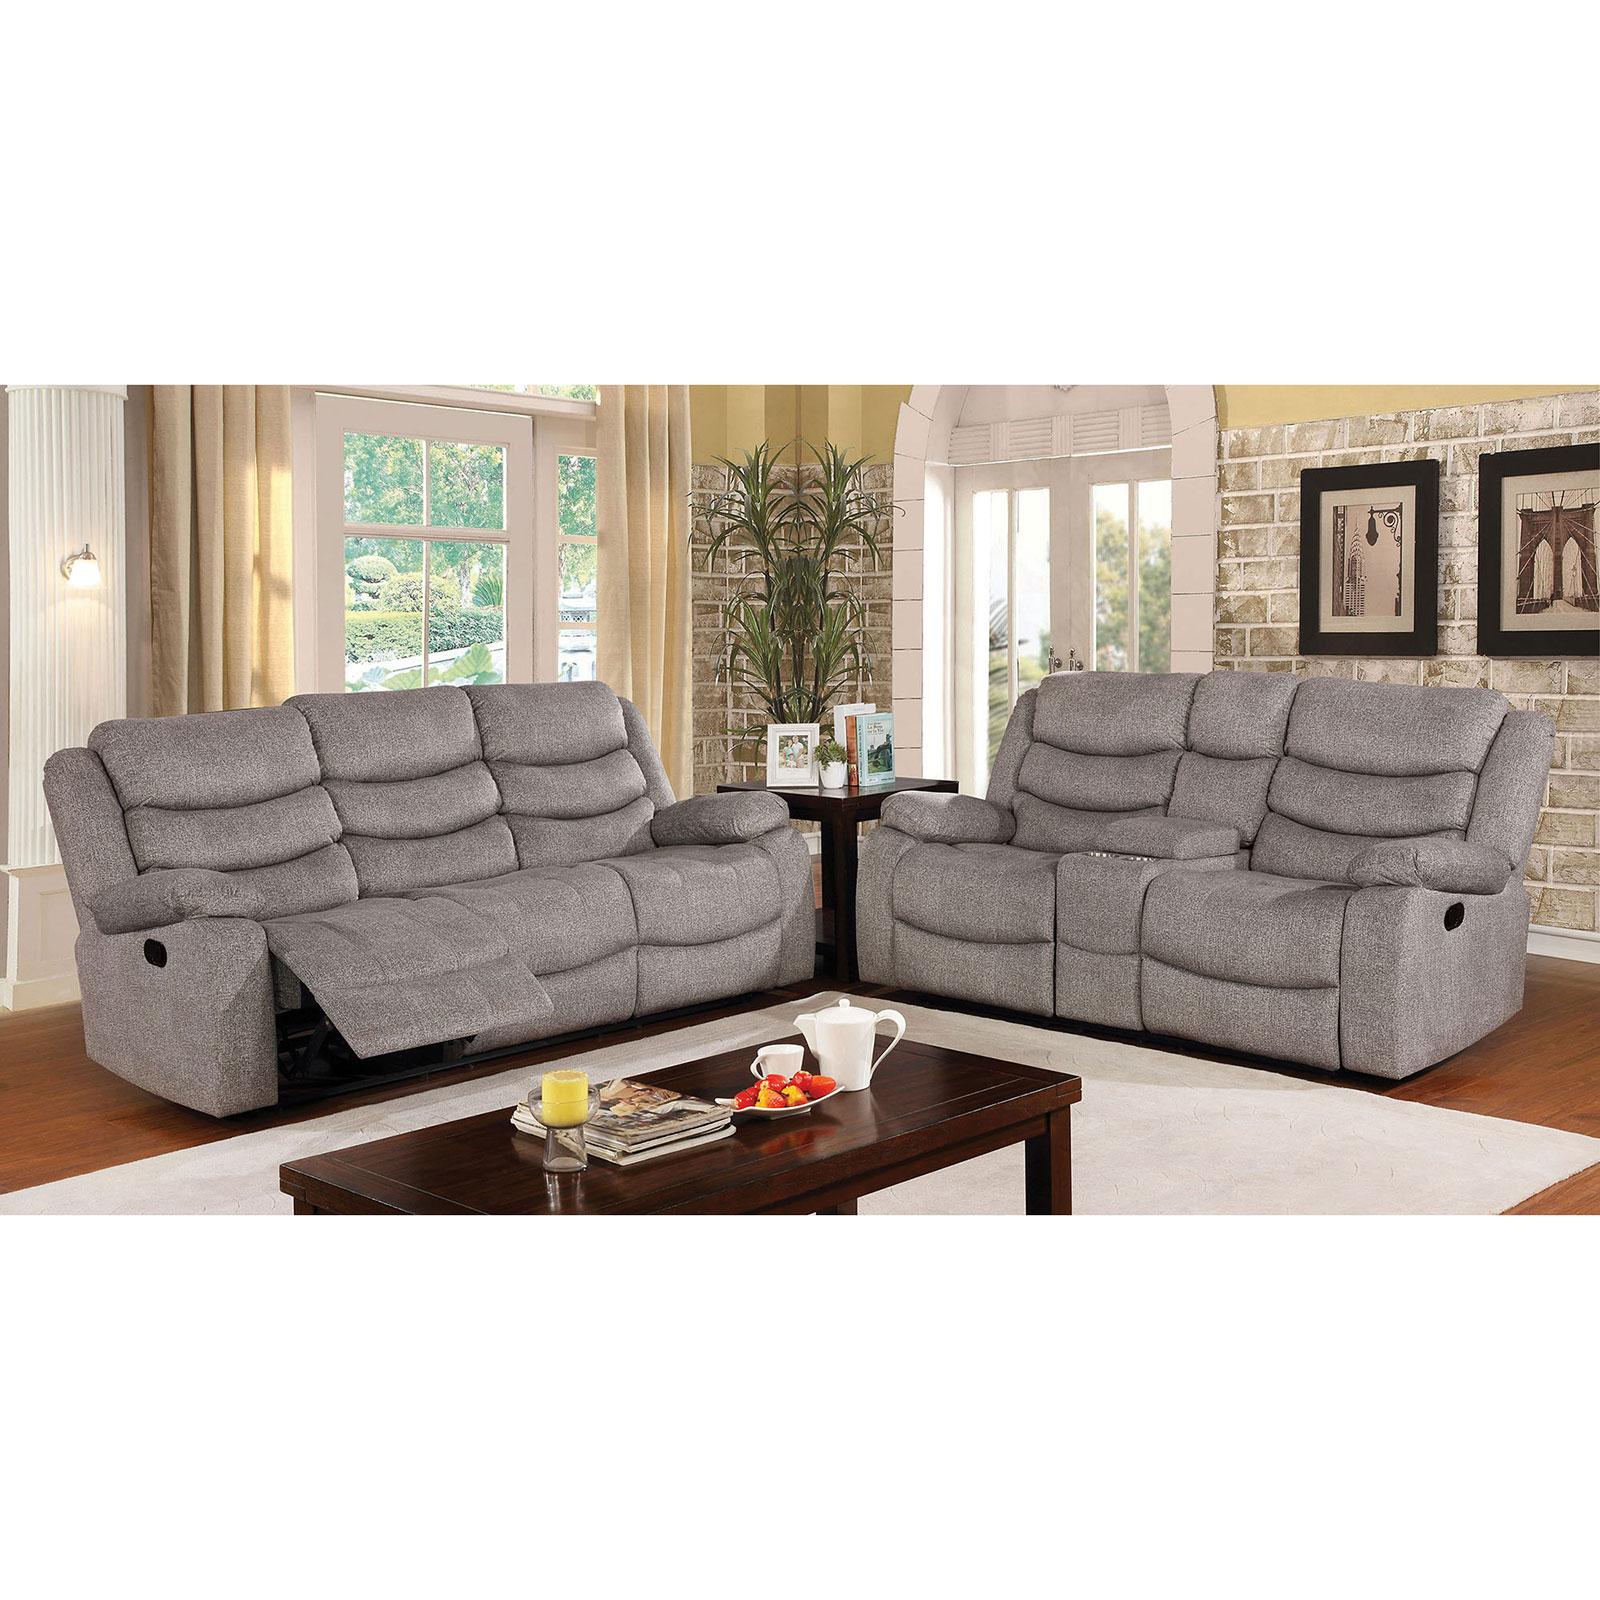 Transitional Reclining Set Castleford CM6940-Set-2 in Gray Fabric